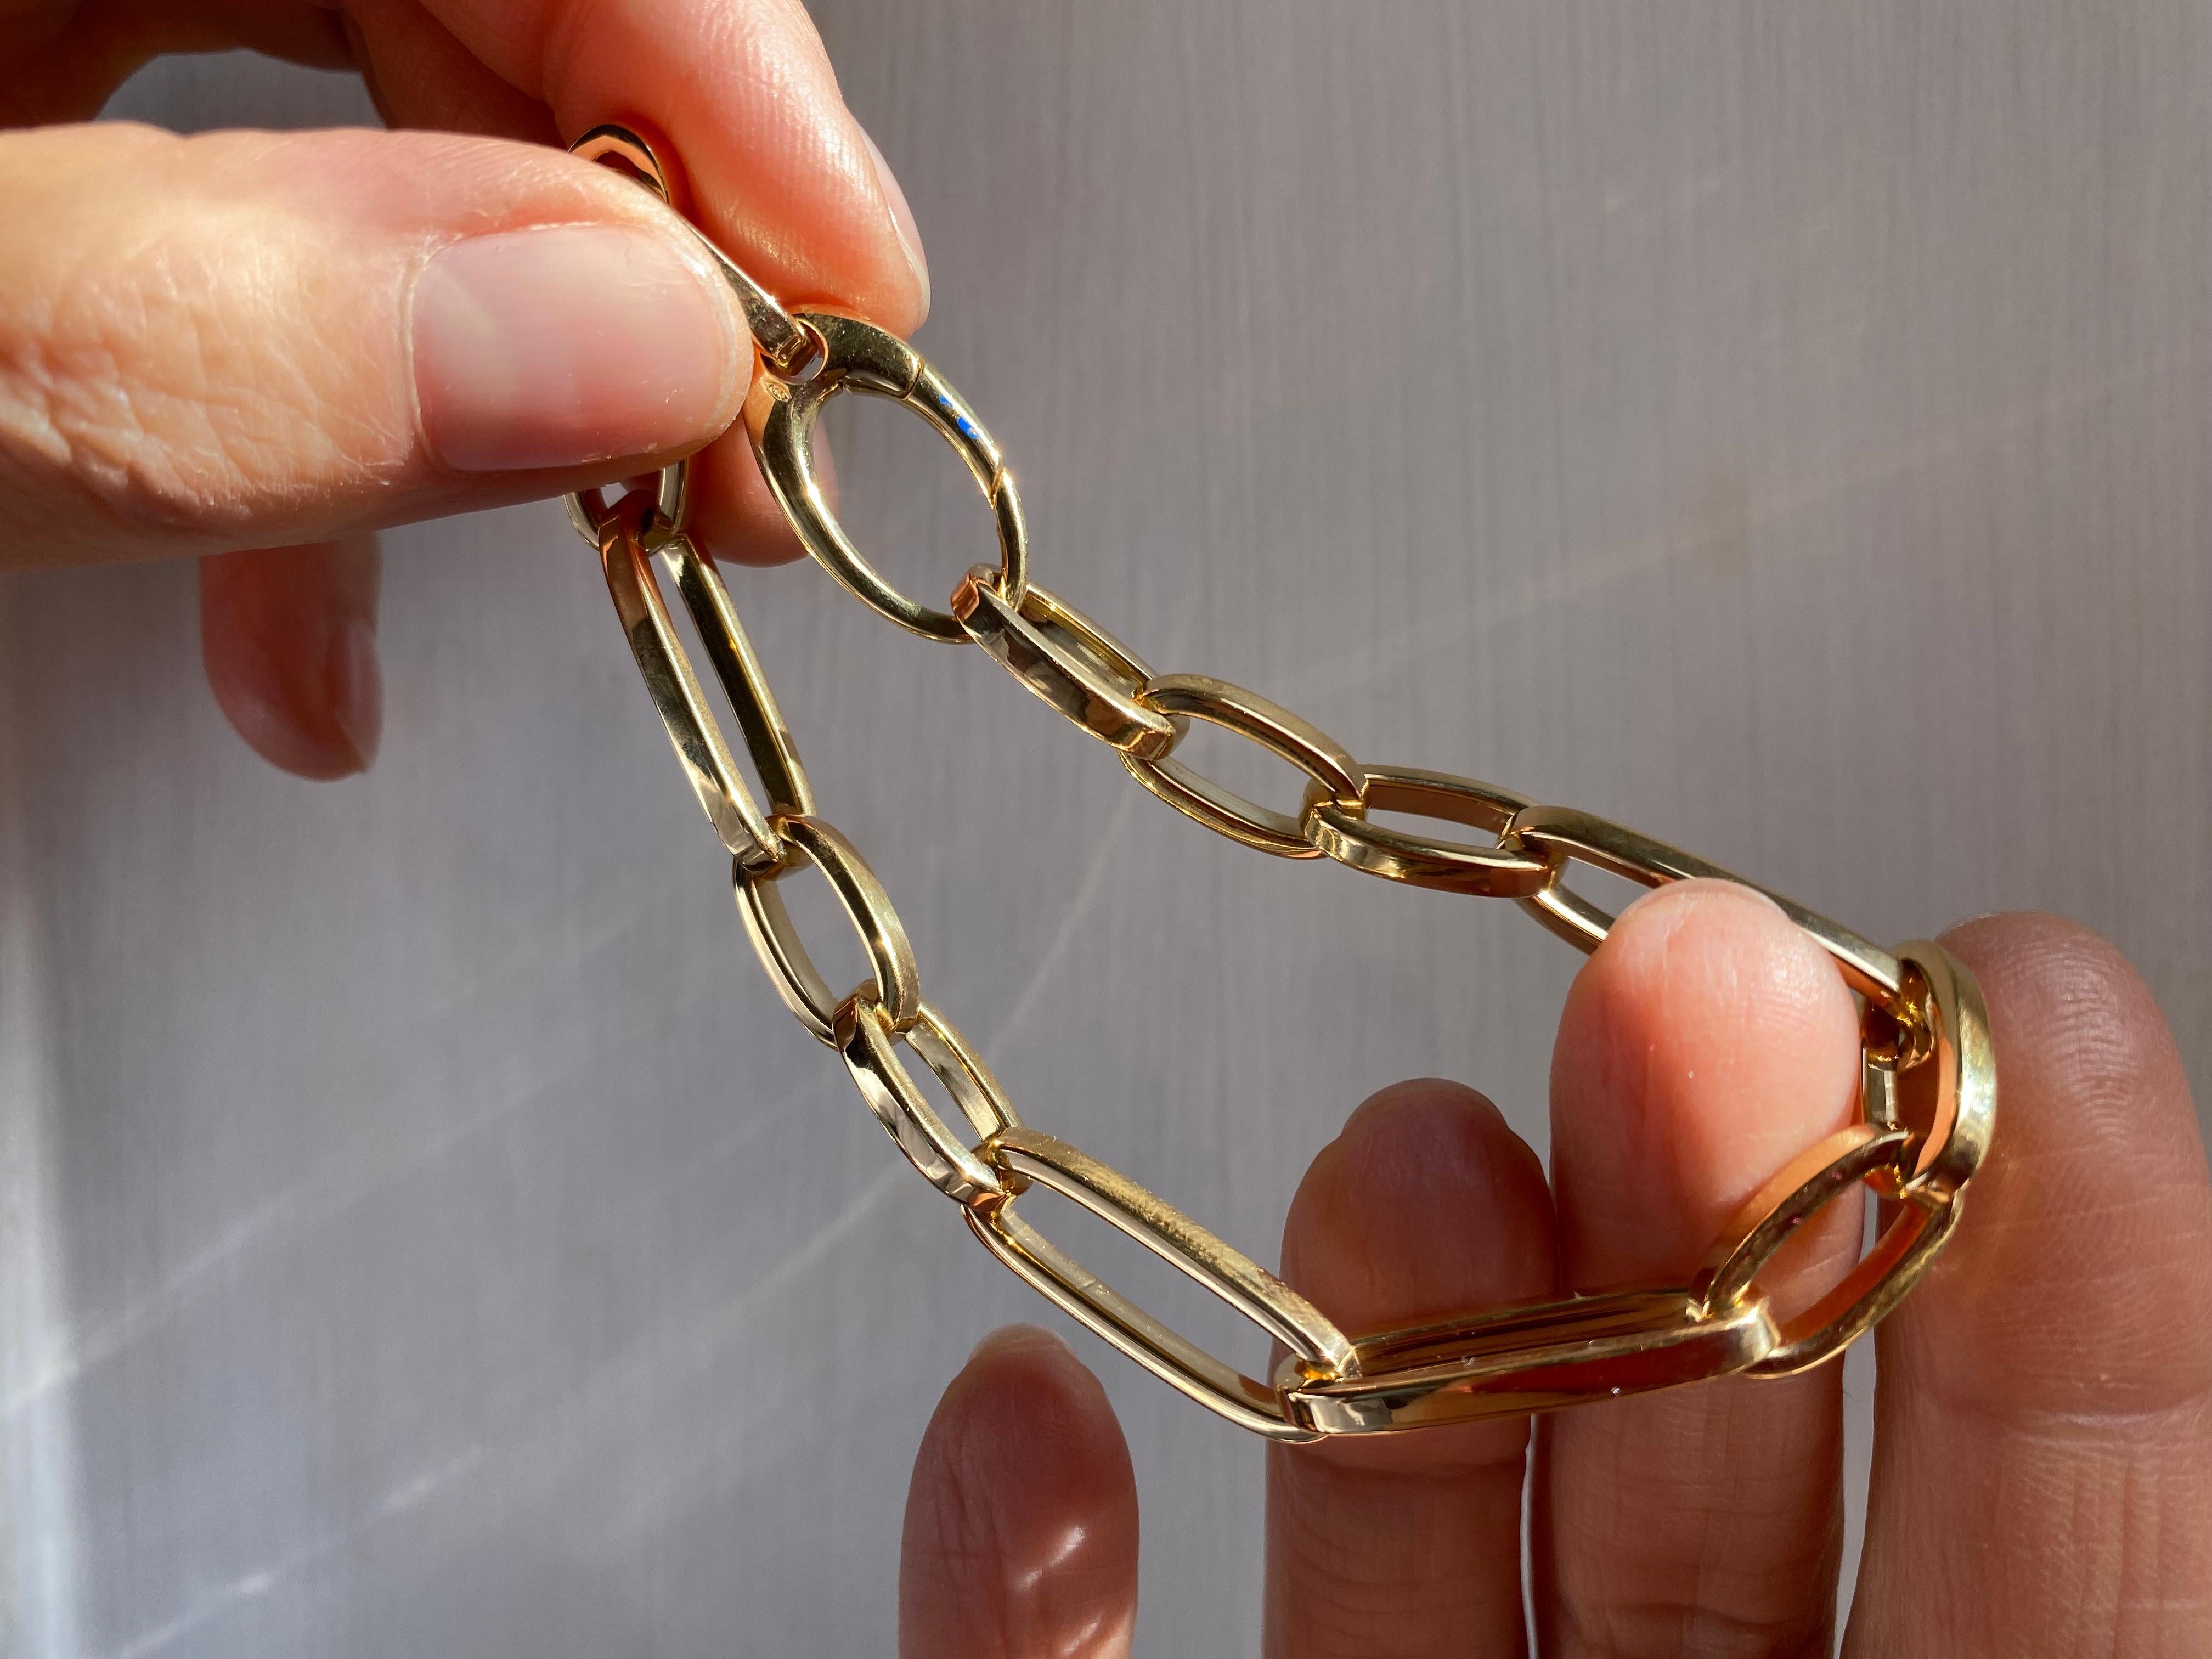 Rossella Ugolini Design Collection, 18K Yellow Gold Modern Chain Unisex Link Bracelet Made in Italy.  Dimensions: Length.  Inches 7.87 (20cm)   H. Inches 0.35 (9mm)  Grams. 13.20
This 18k yellow gold chain bracelet is a modern and stylish accessory